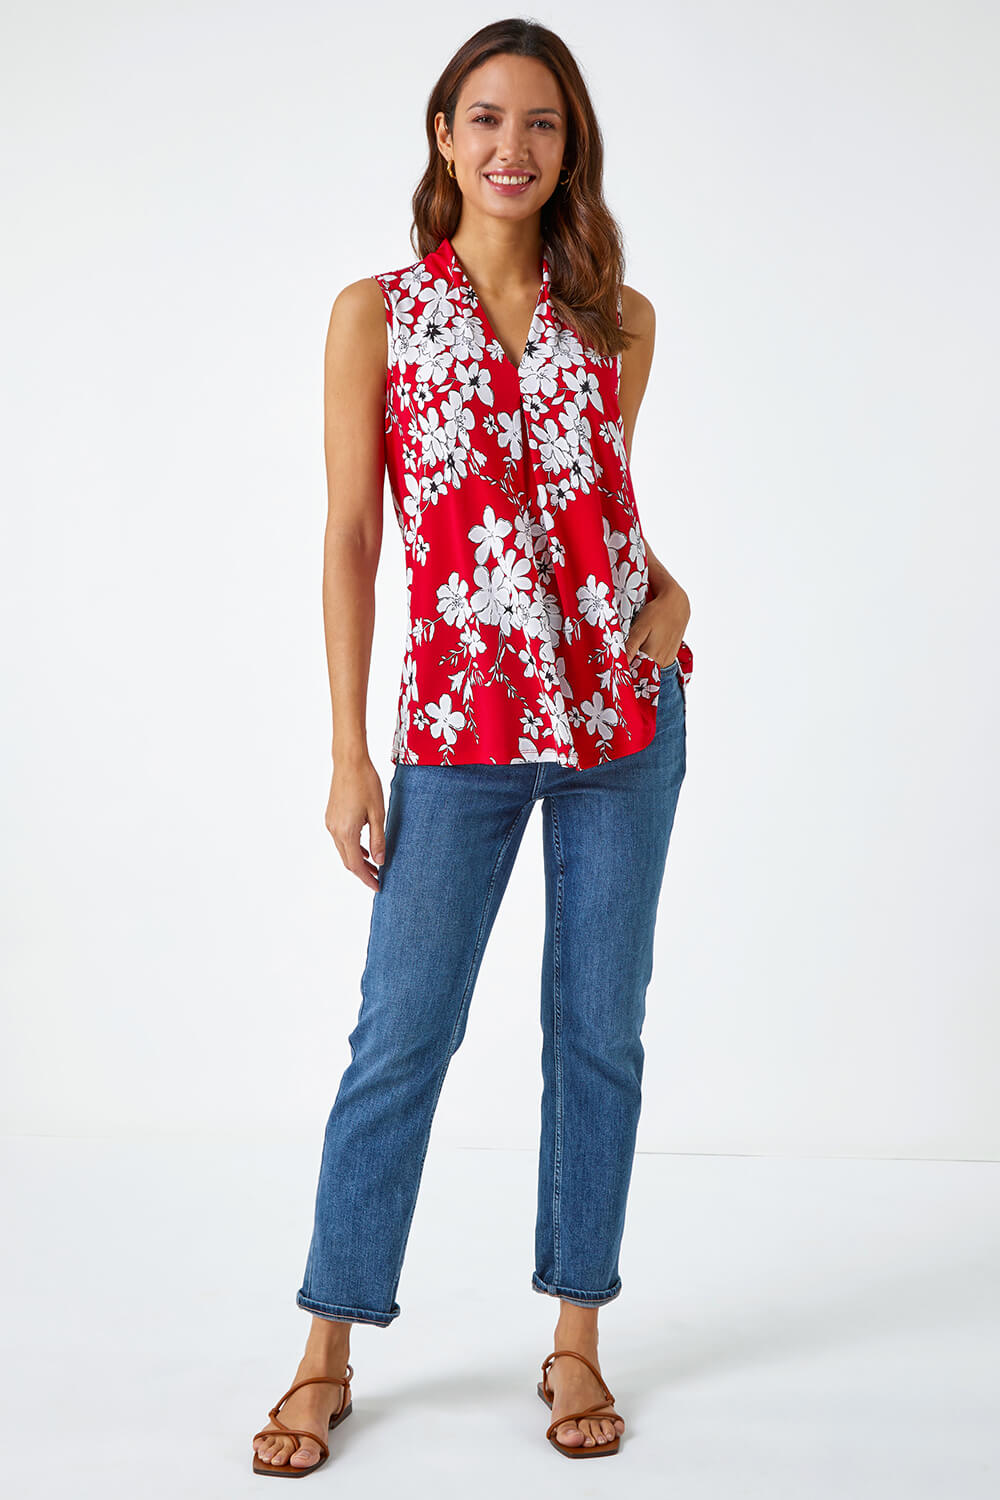 Red Textured Floral Print Sleeveless Top, Image 2 of 5